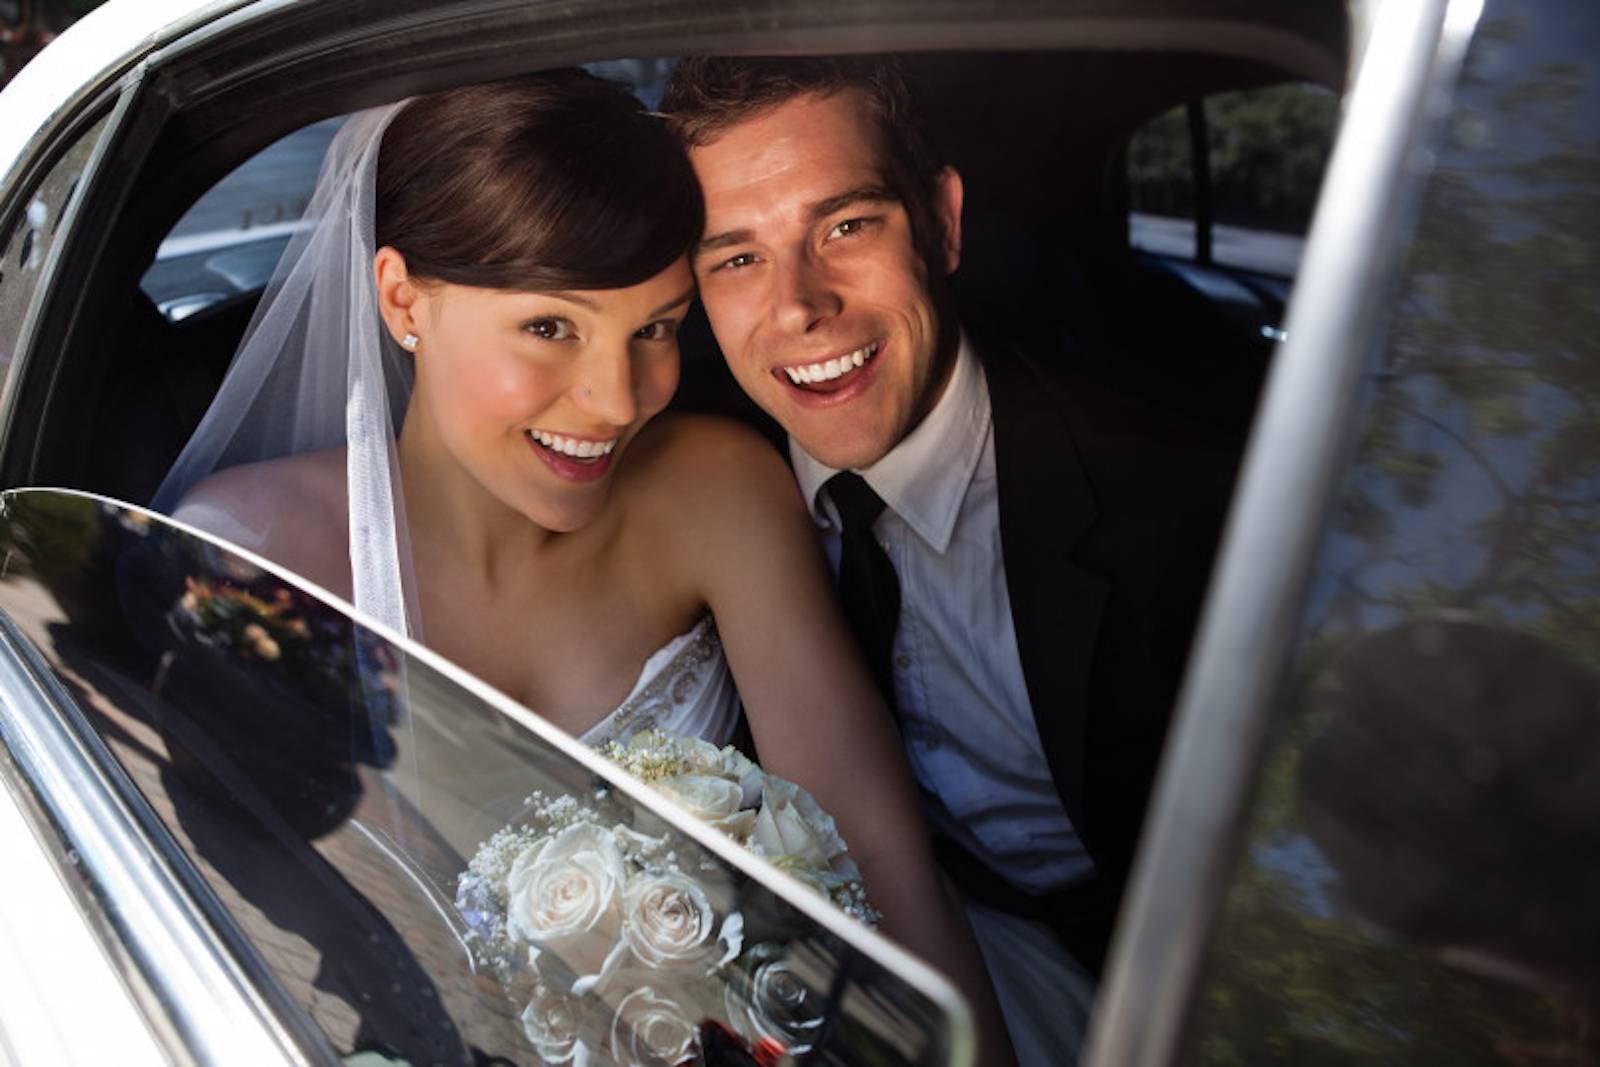 Meet Metro Livery: Providing Exceptional Car Service for Your Nashville Wedding